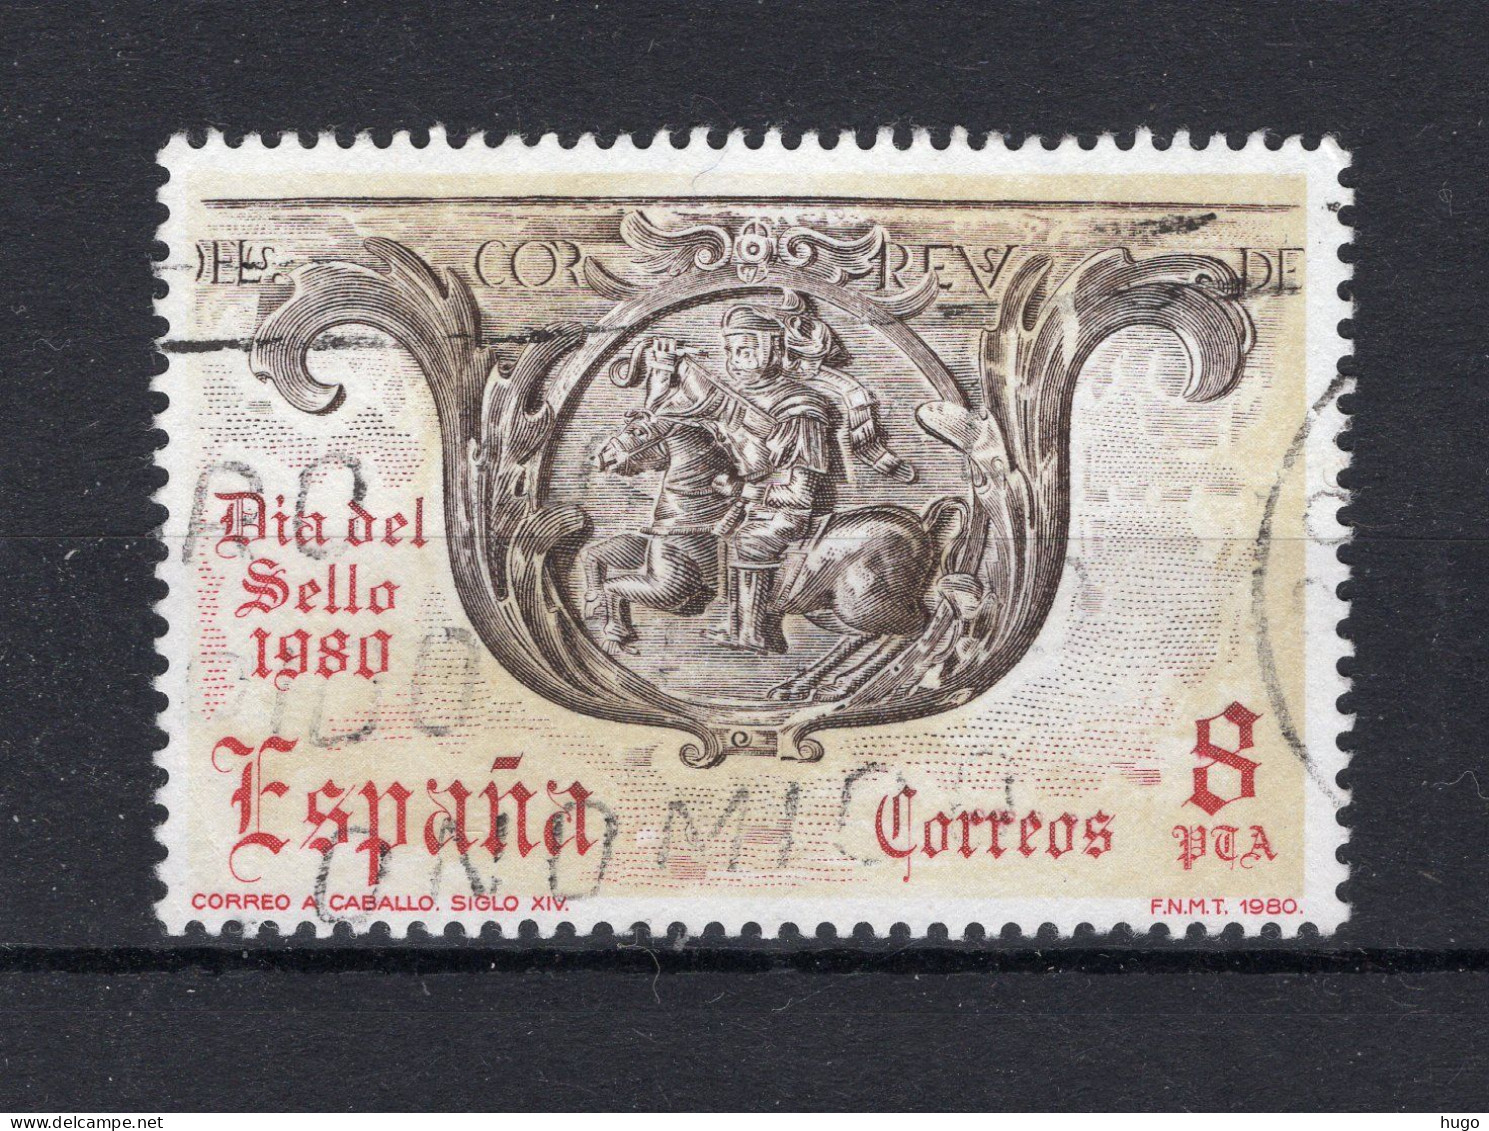 SPANJE Yt. 2221° Gestempeld 1980 - Used Stamps